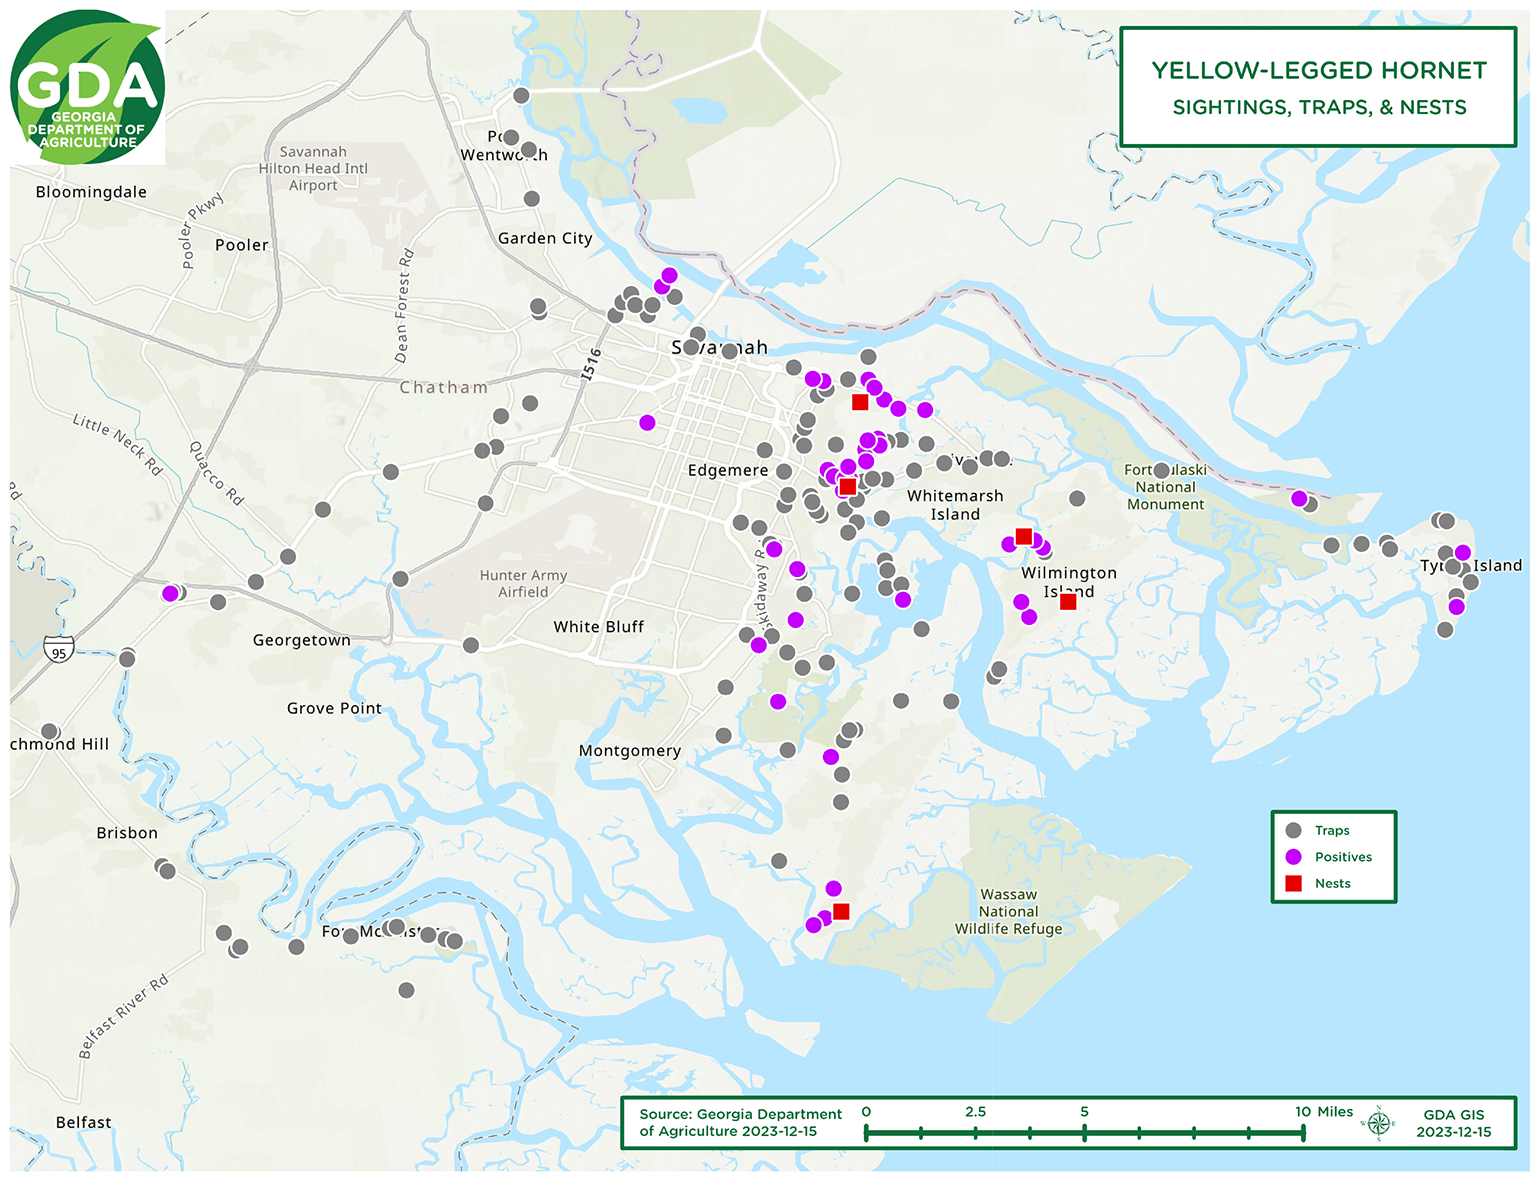 Map shows the region around Savannah and the coast, identifying a perimeter of traps inland, numerous sightings across the region, four nests found between Savannah and Wilmington Island, and one nest to the south just outside of Wassaw National Wildlife Refuge.